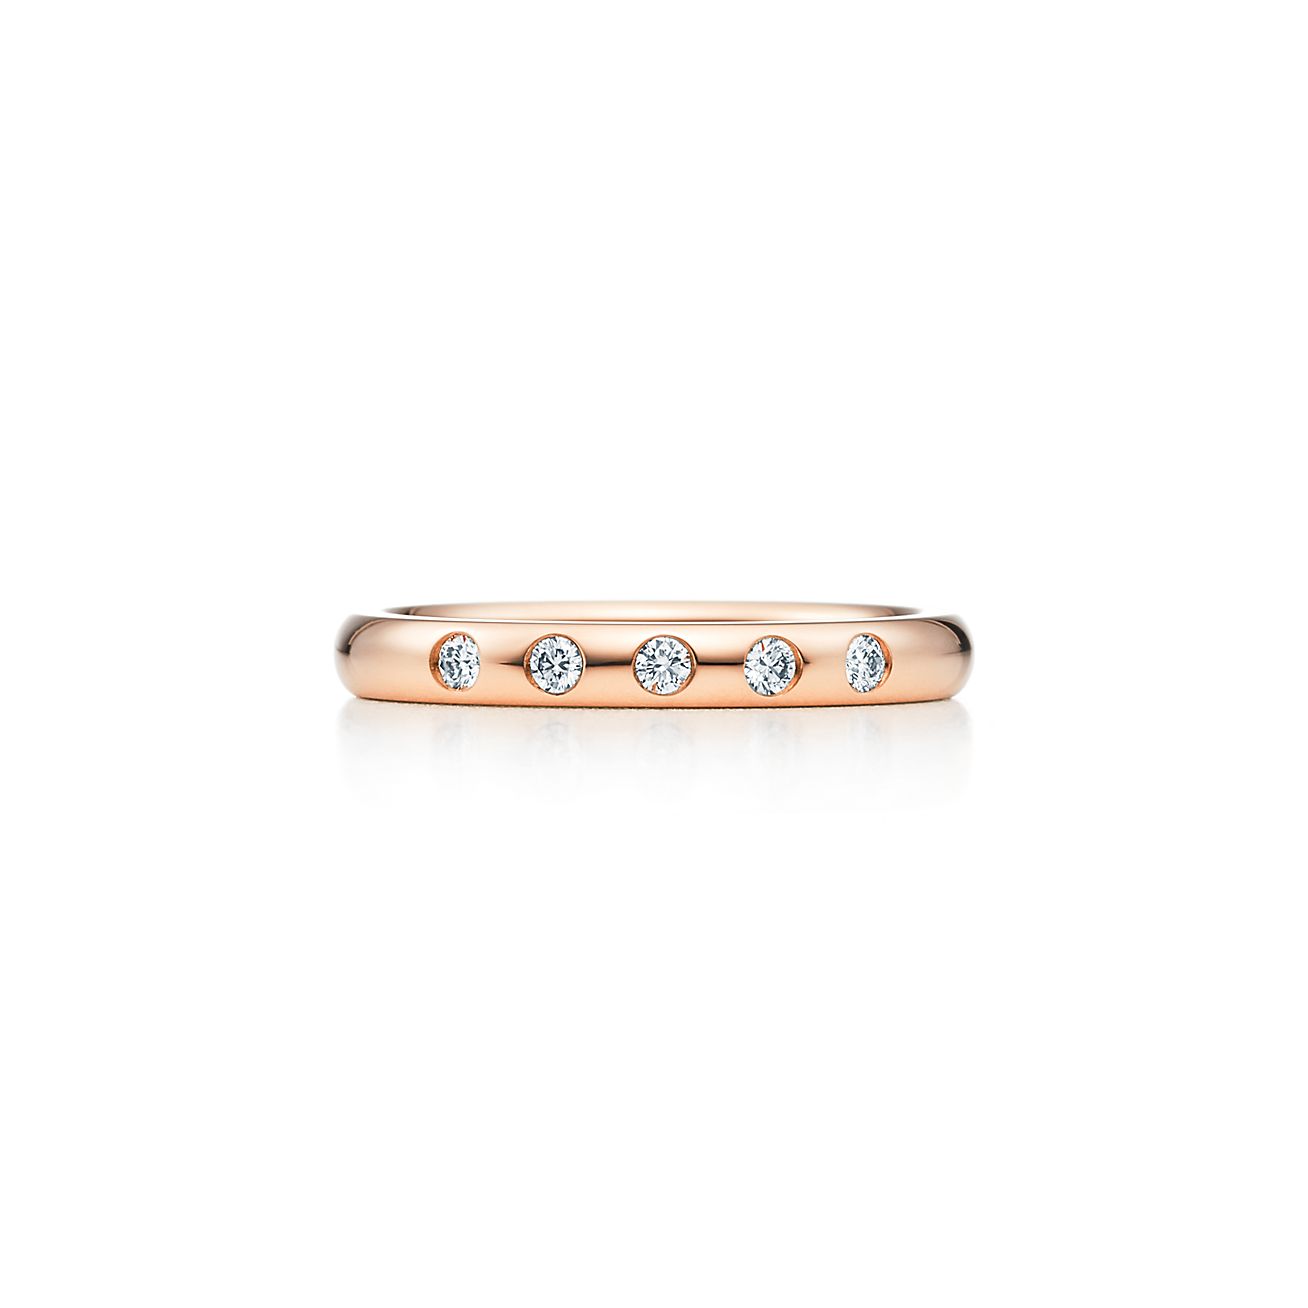 tiffany and co stacking rings